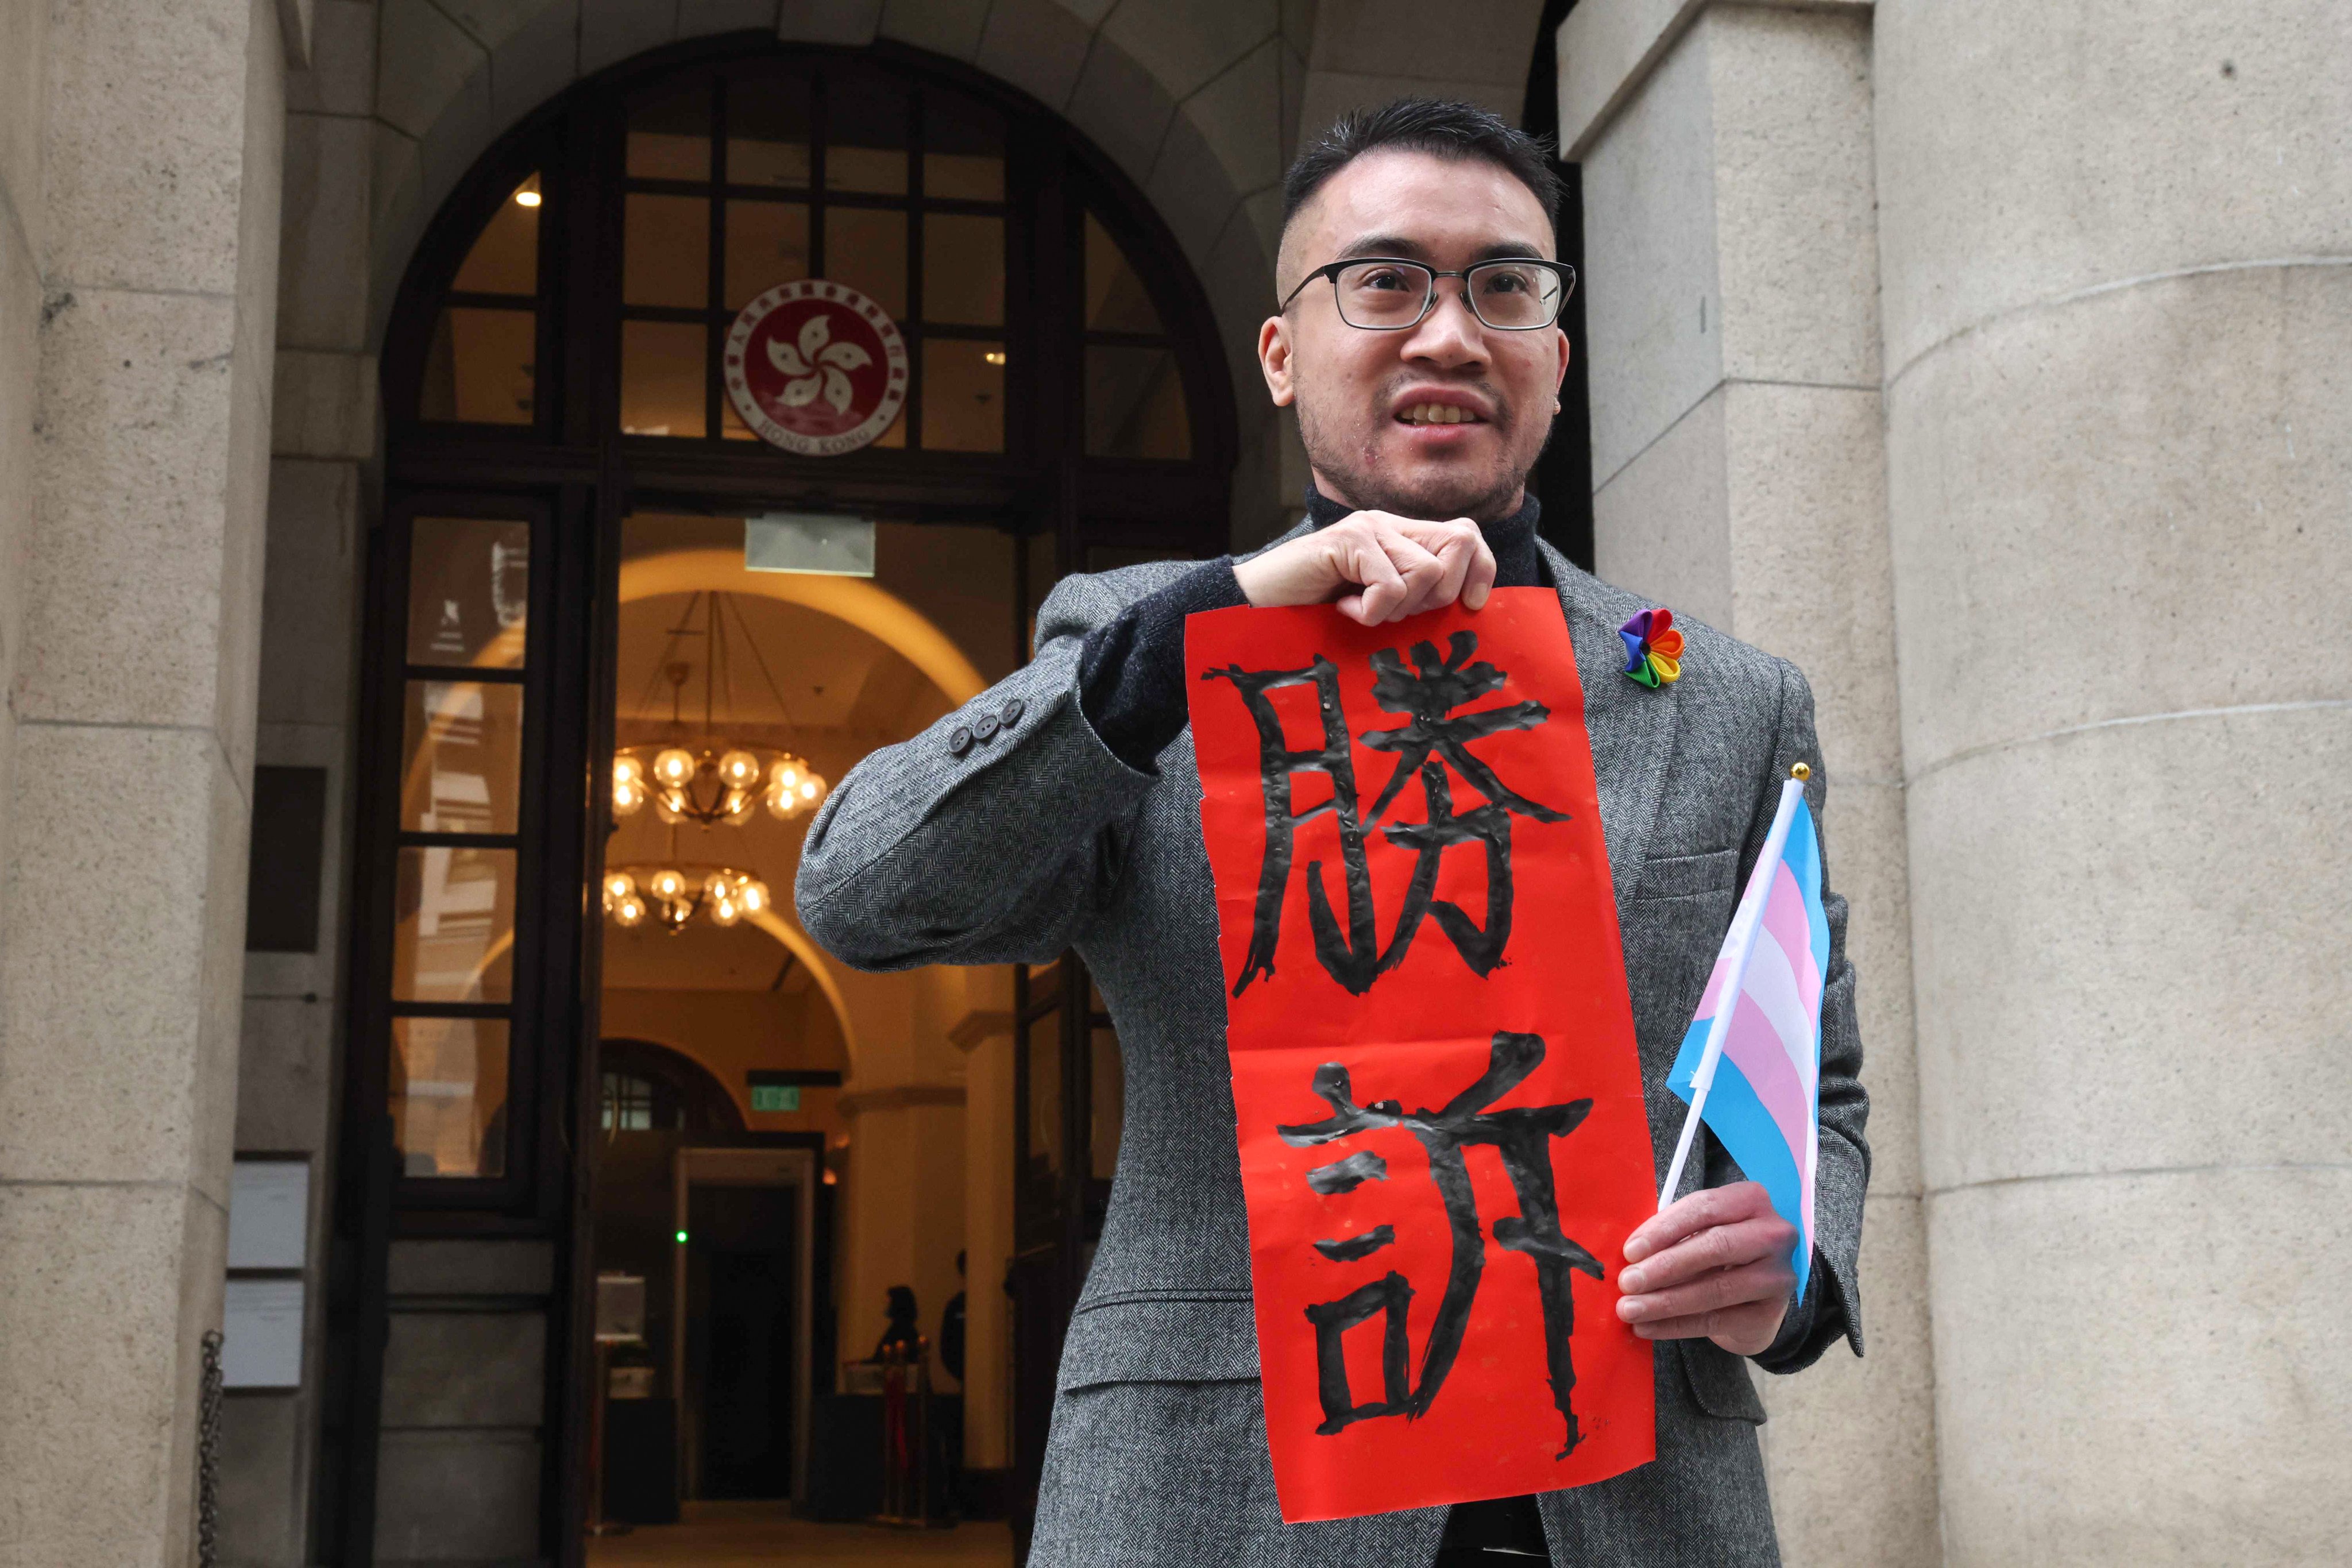 Henry Edward Tse outside the Court of Final Appeal displaying a fai chun with the Chinese characters for “victory” after a landmark decision on gender changes to official ID documents. Photo: Edmond So